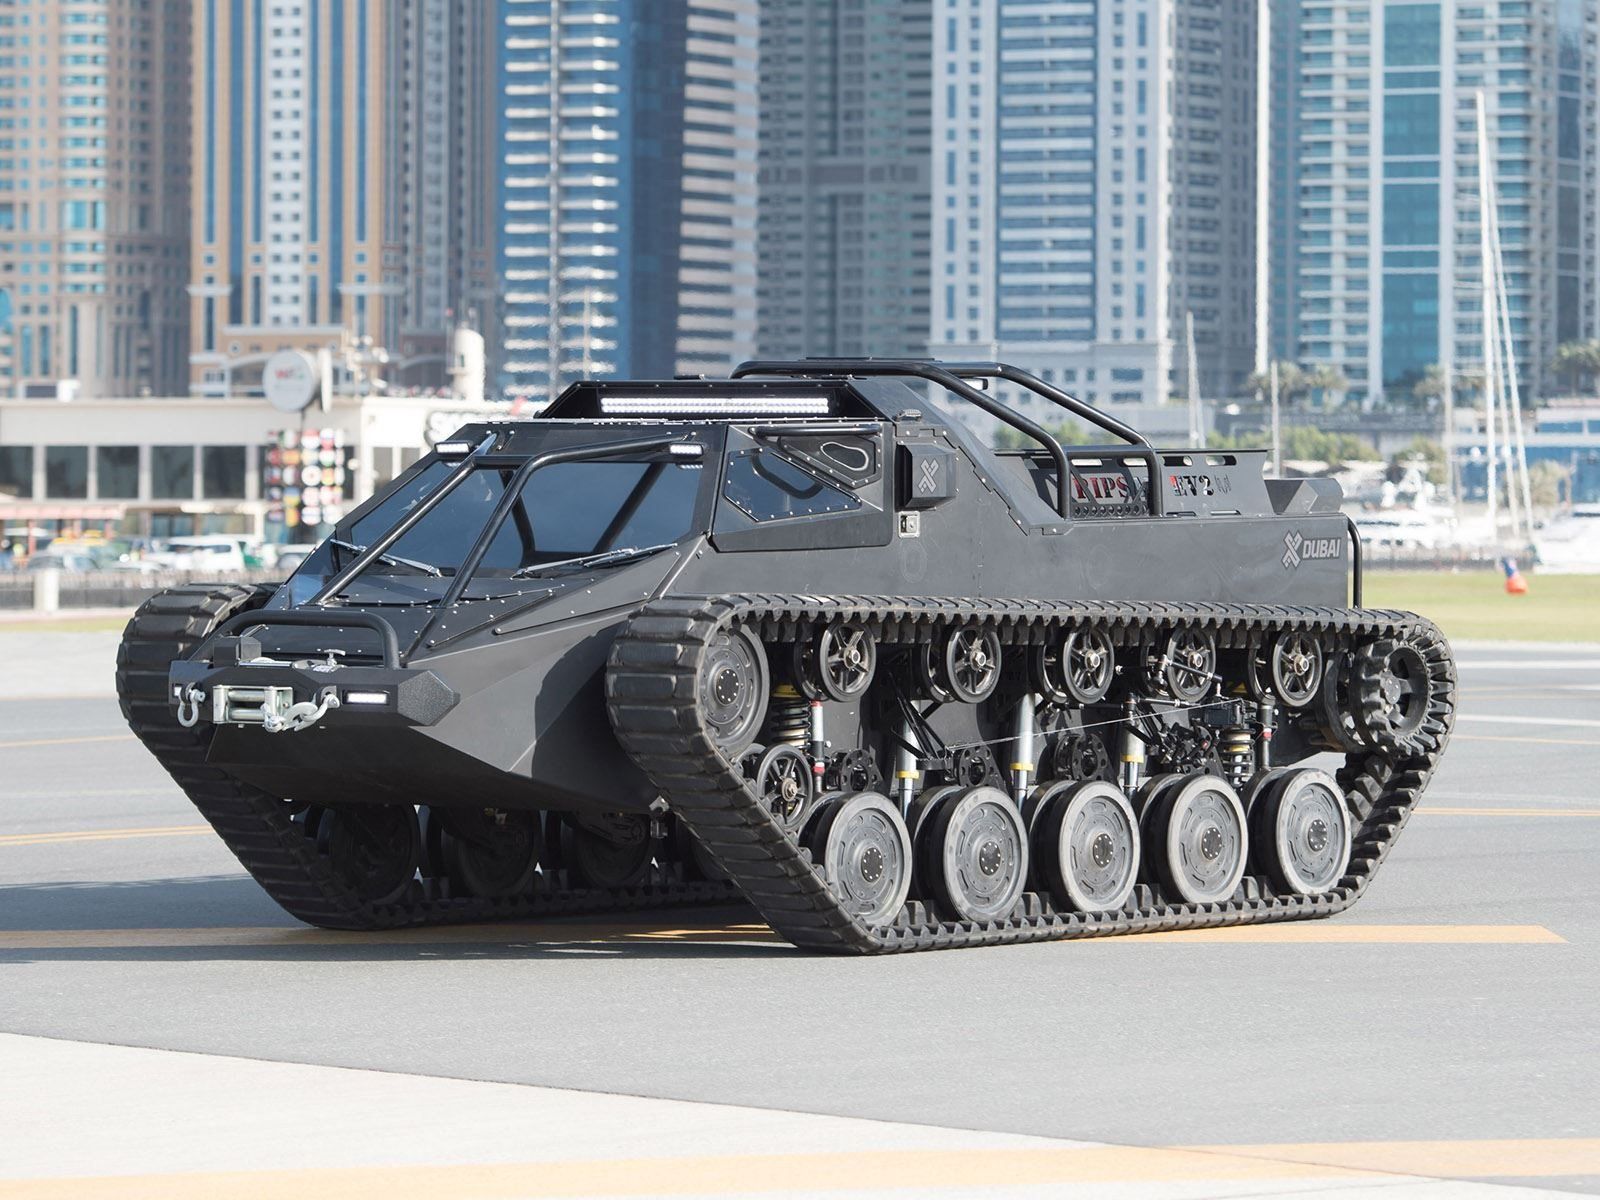 This Is The World's Fastest Luxury Super Tank